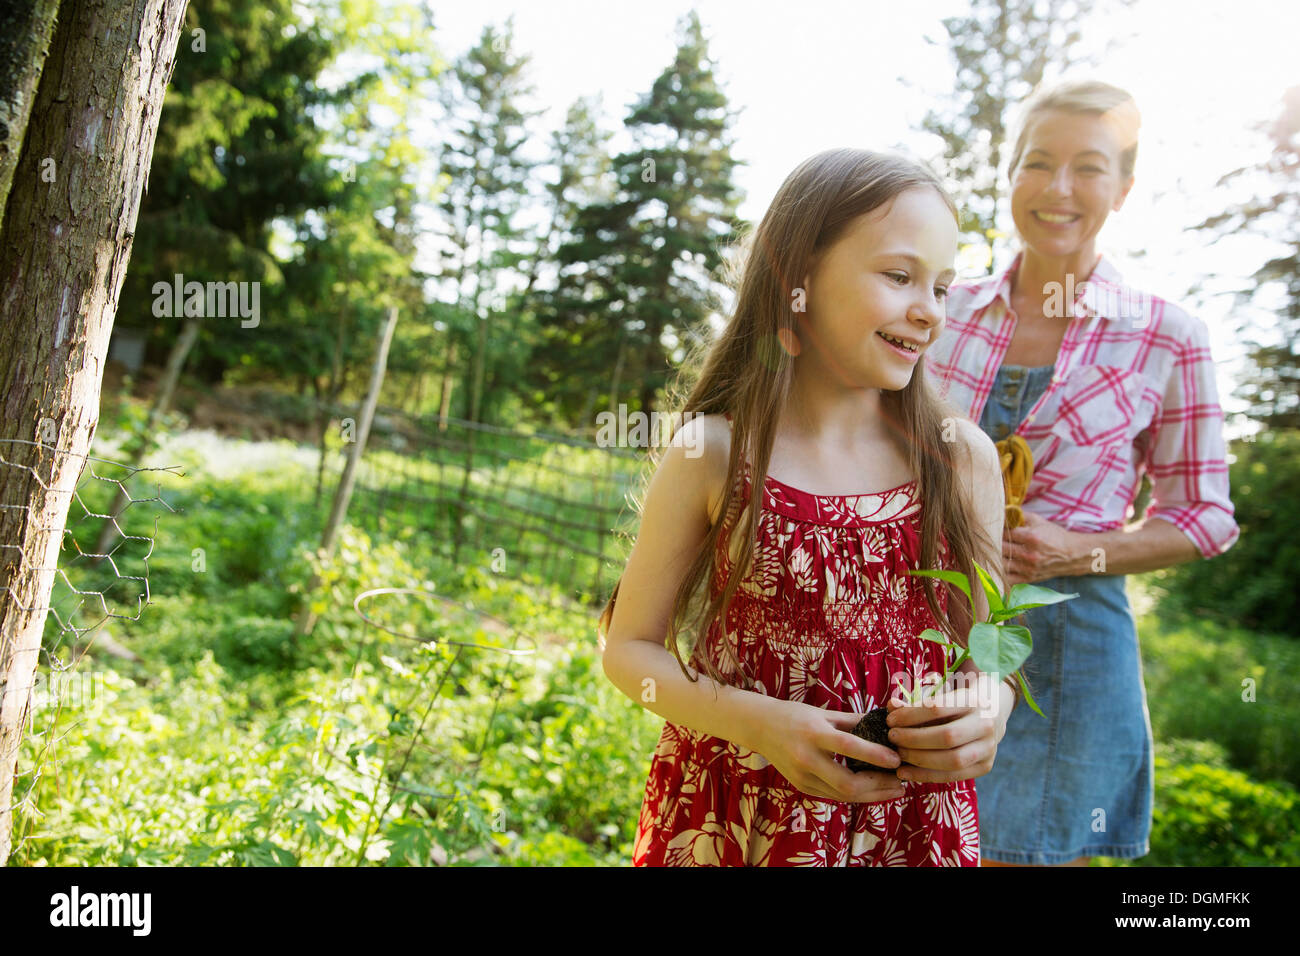 A young girl holding a seedling plant, and walking through the gardens of the farm with an adult woman following. Stock Photo